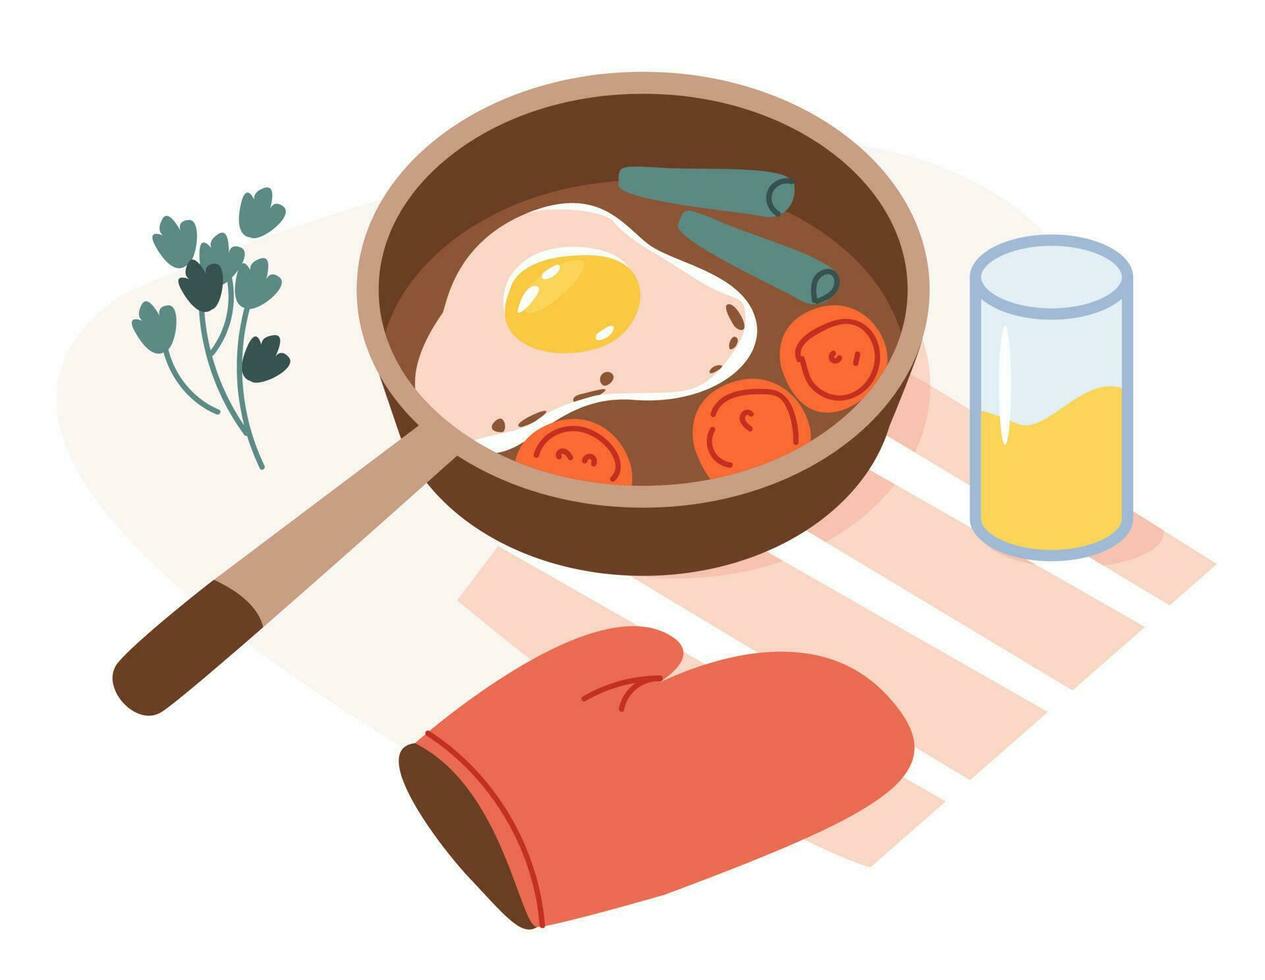 Scrambled eggs for breakfast. Frying pan with eggs and vegetables. Healthy homemade food. Flat vector illustration.